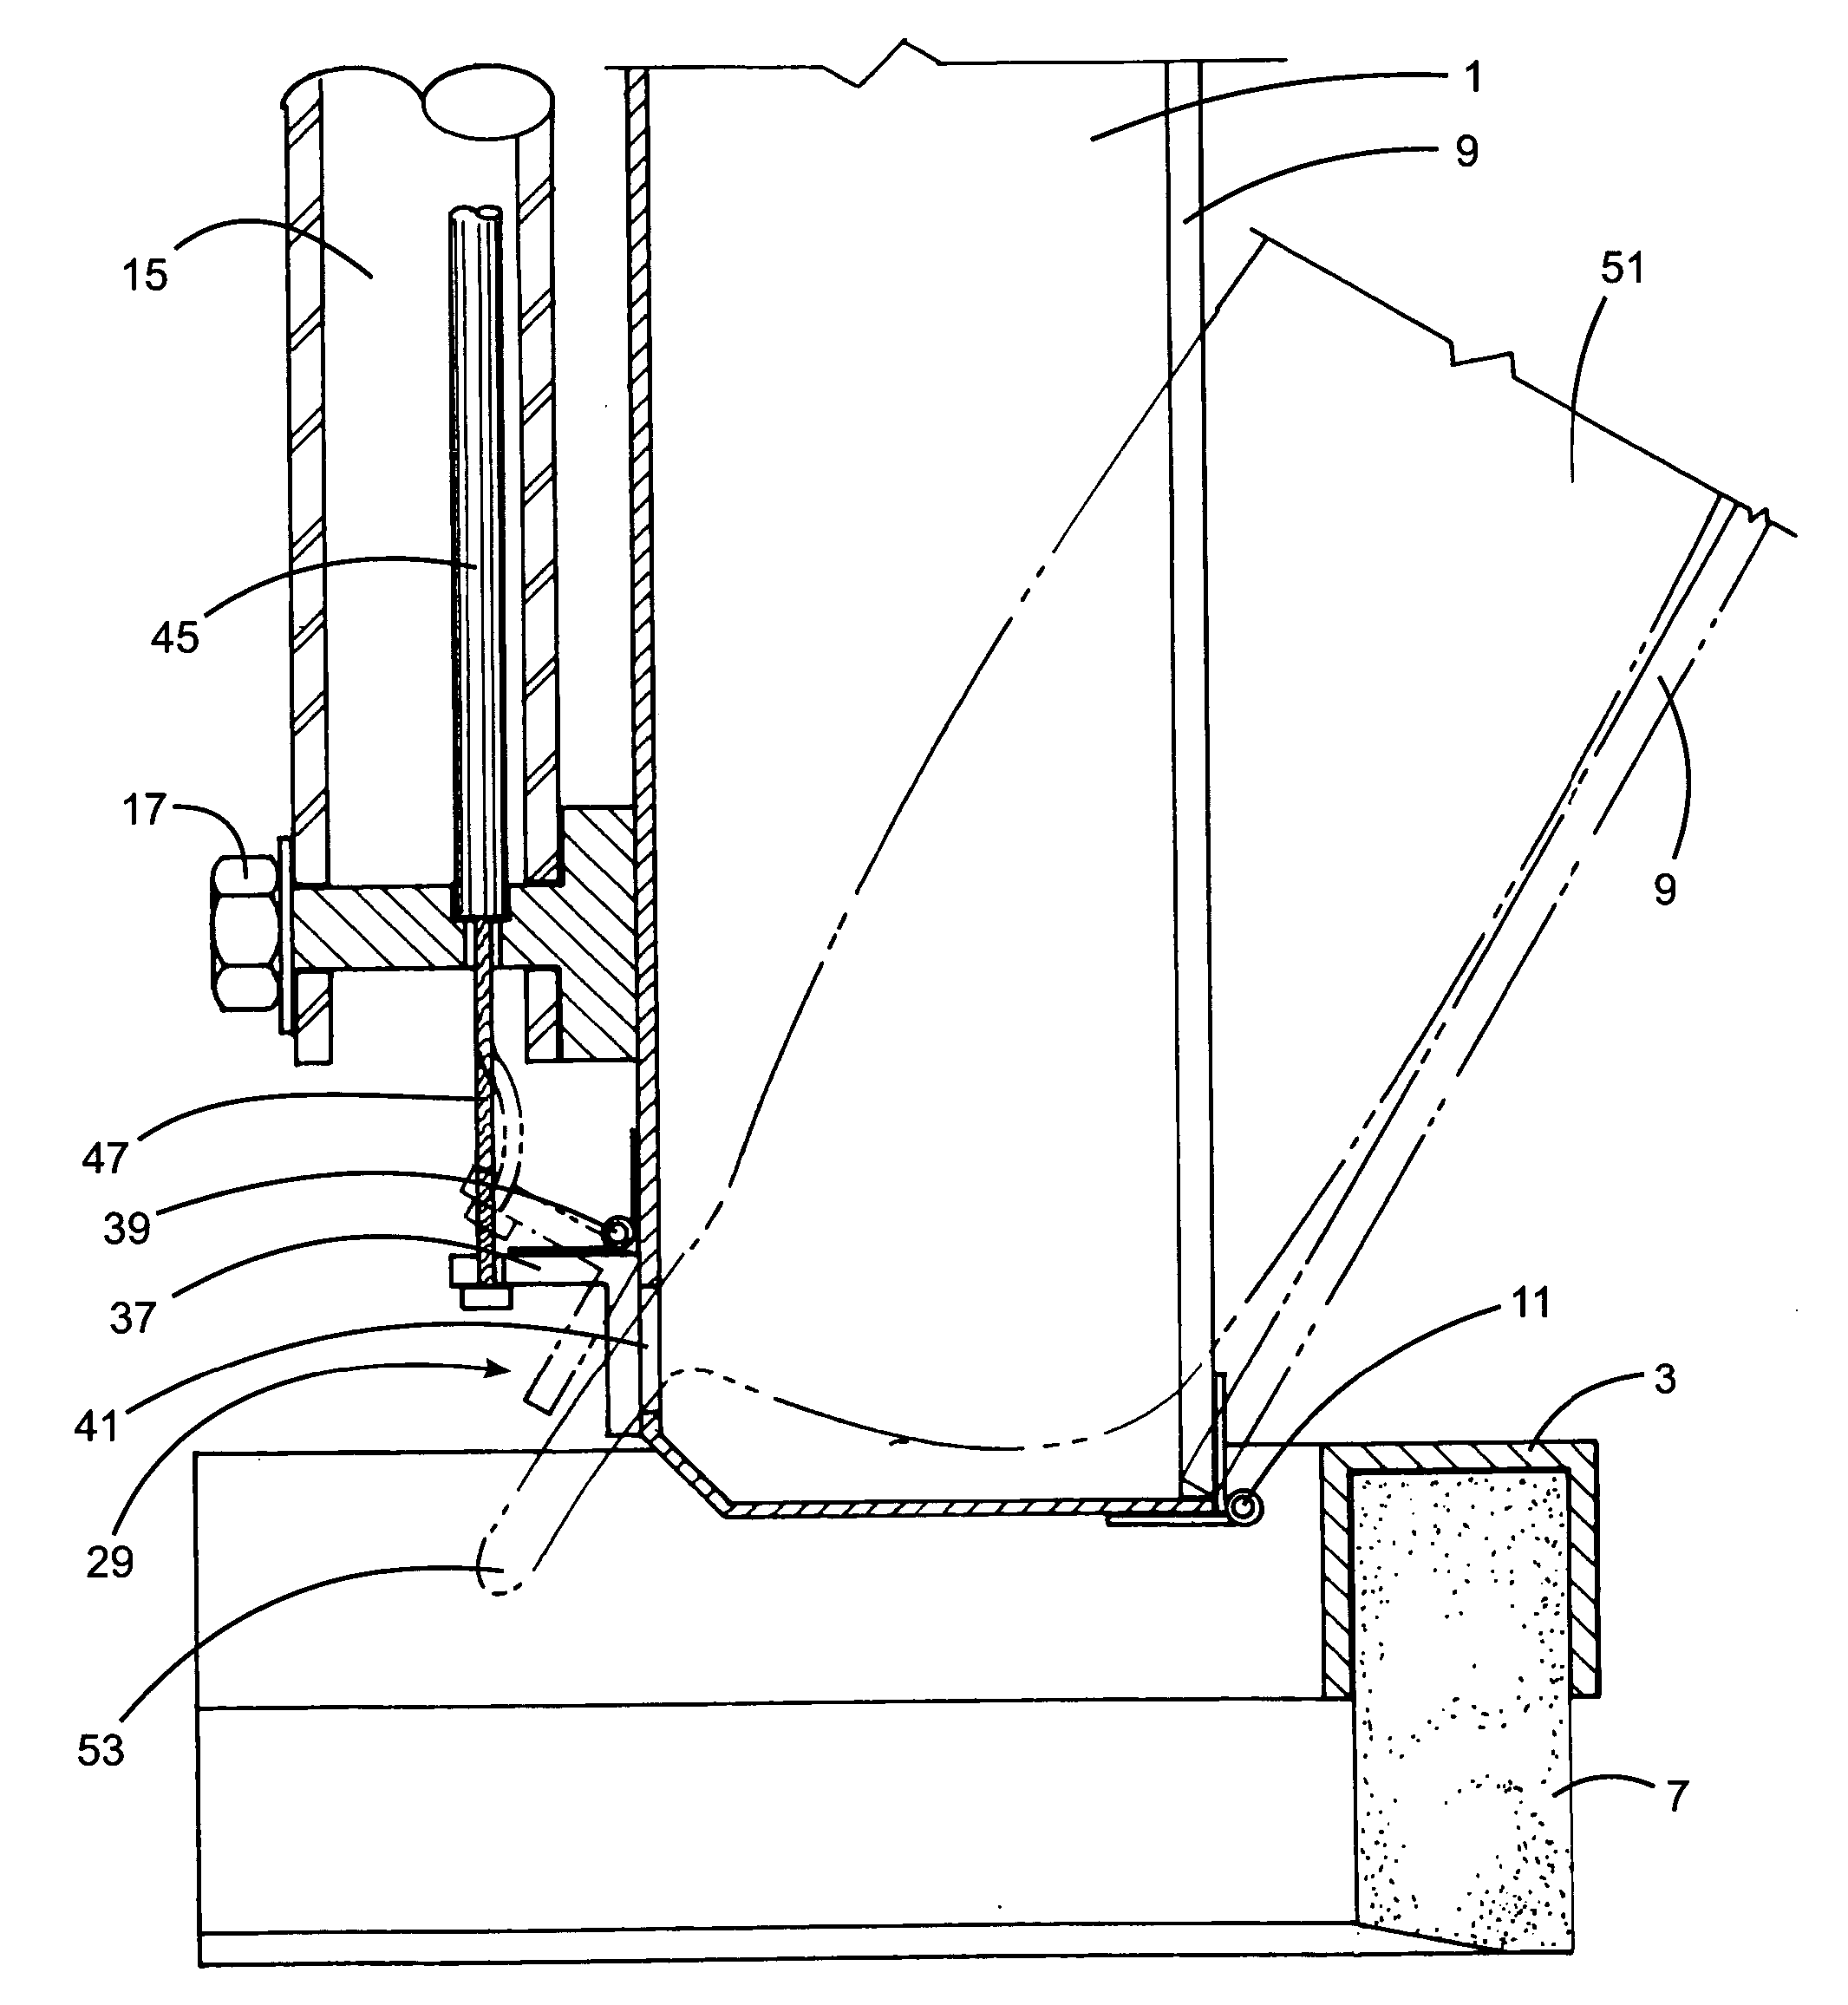 Spreading apparatus for flowable materials and spreader pad therefor